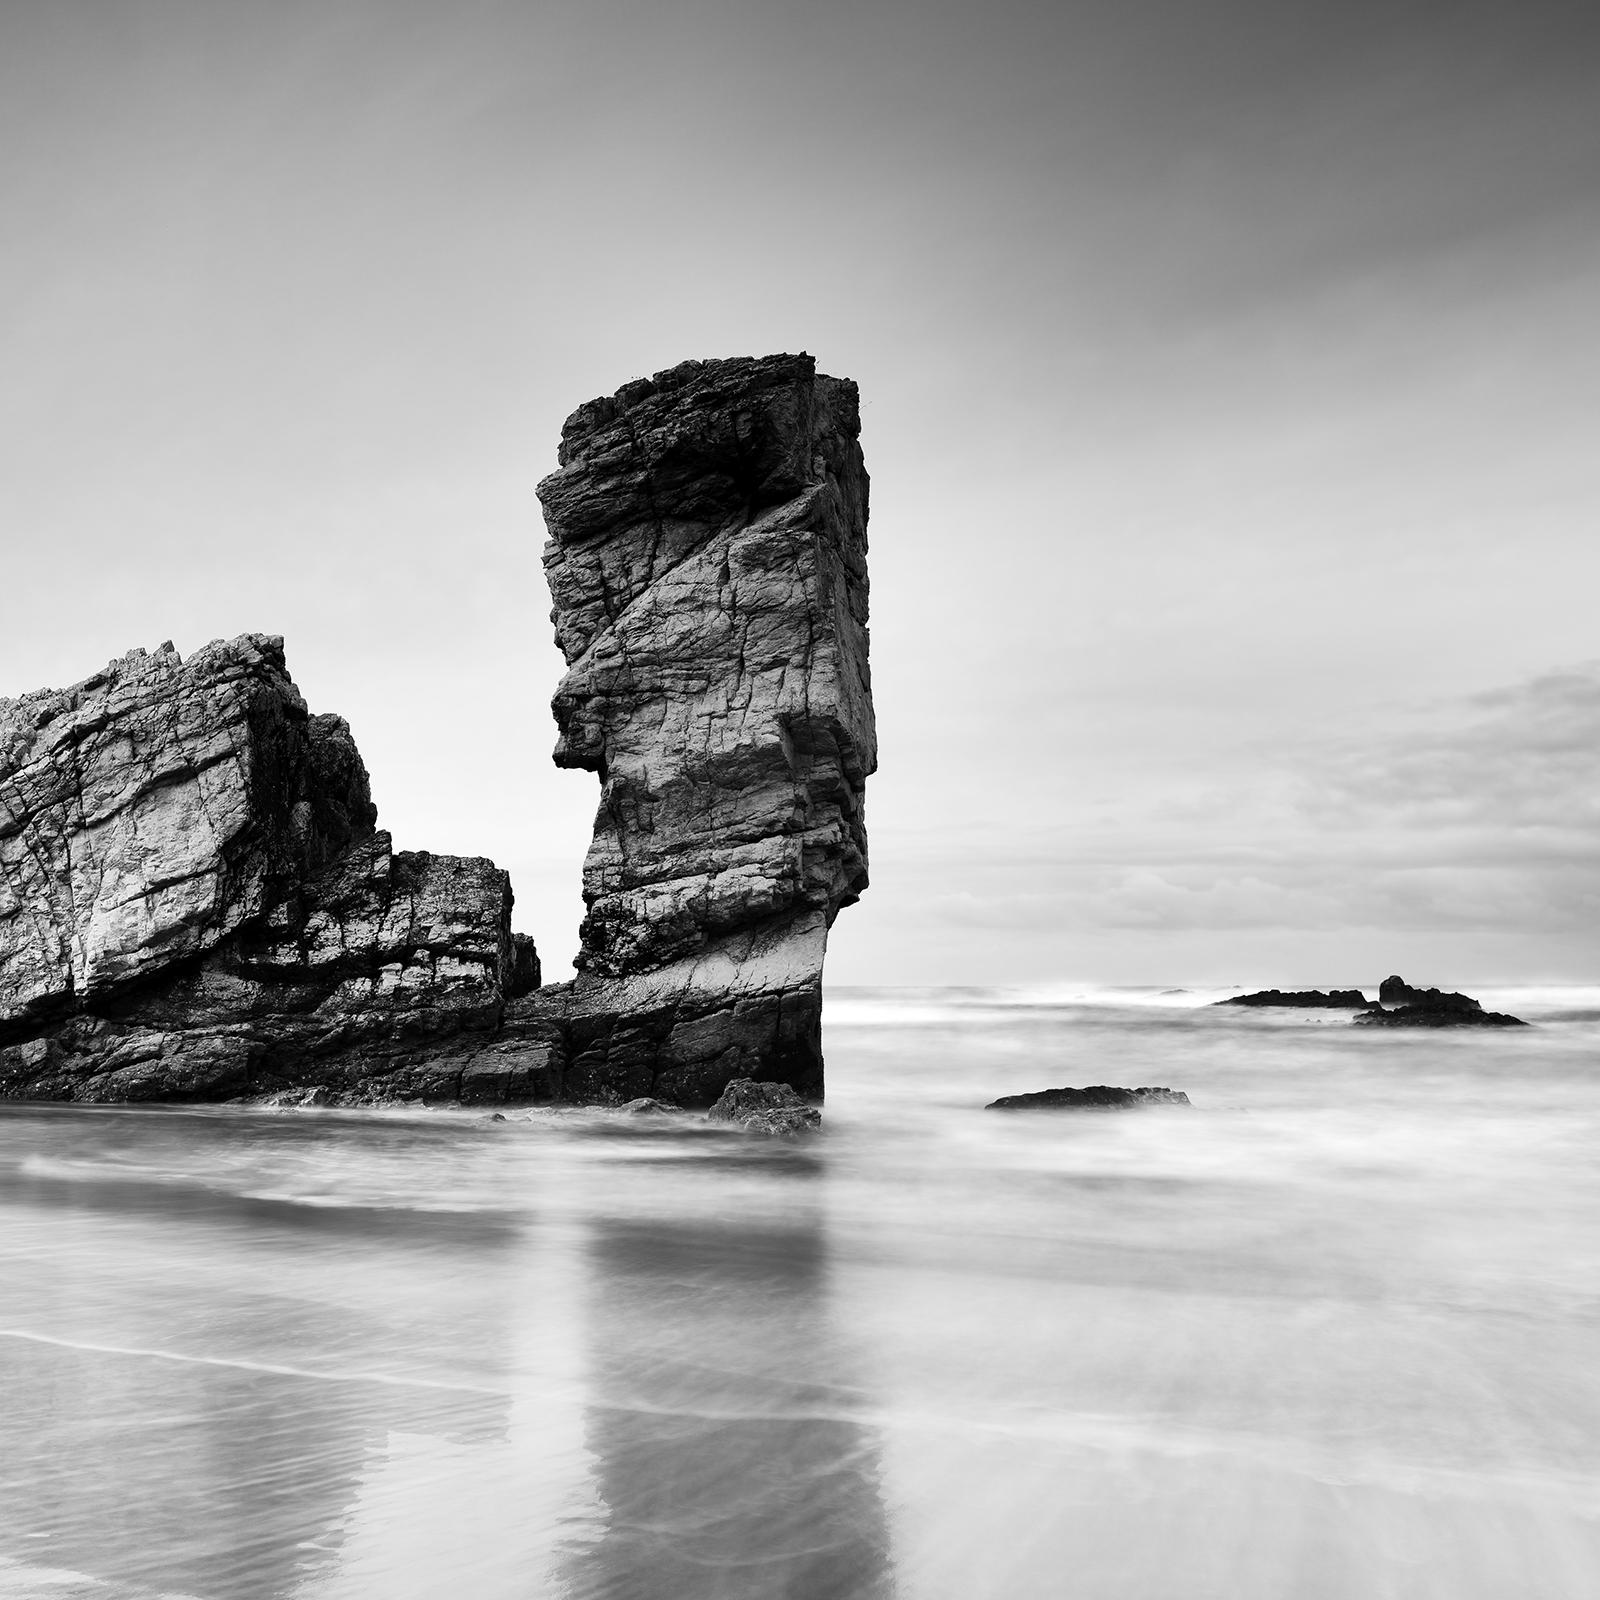 Bay of Biscay, beach, great rock, shoreline, black and white, landscape photo For Sale 4